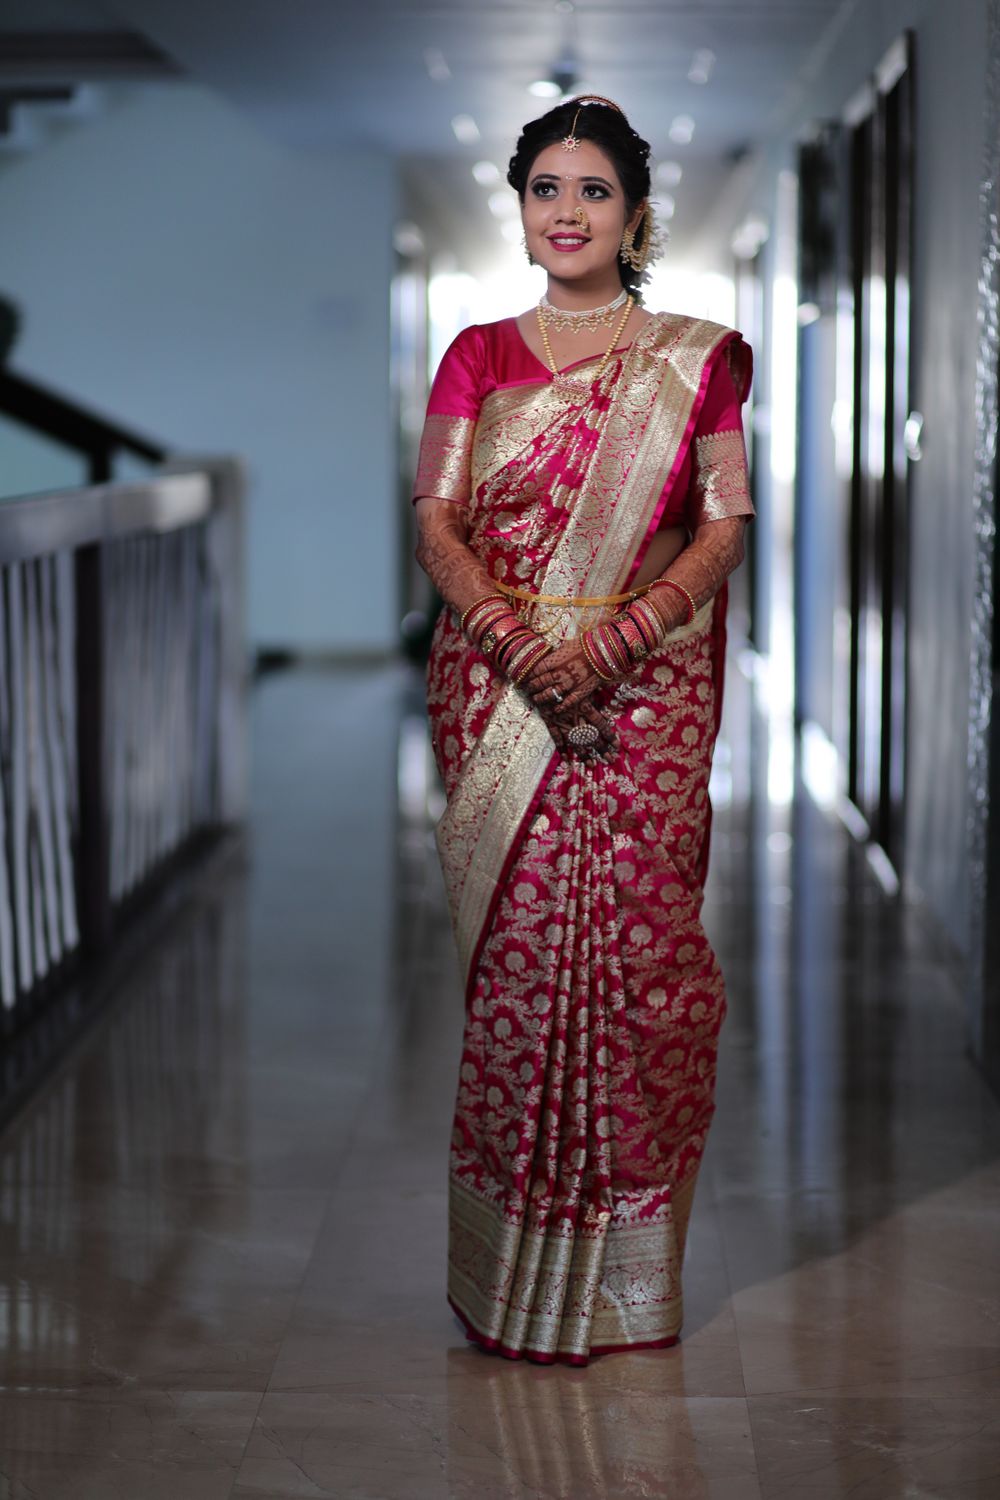 Photo From Anandam Ujjain  - By Shruti Makeovers Bridal Makeup Studio & Academy